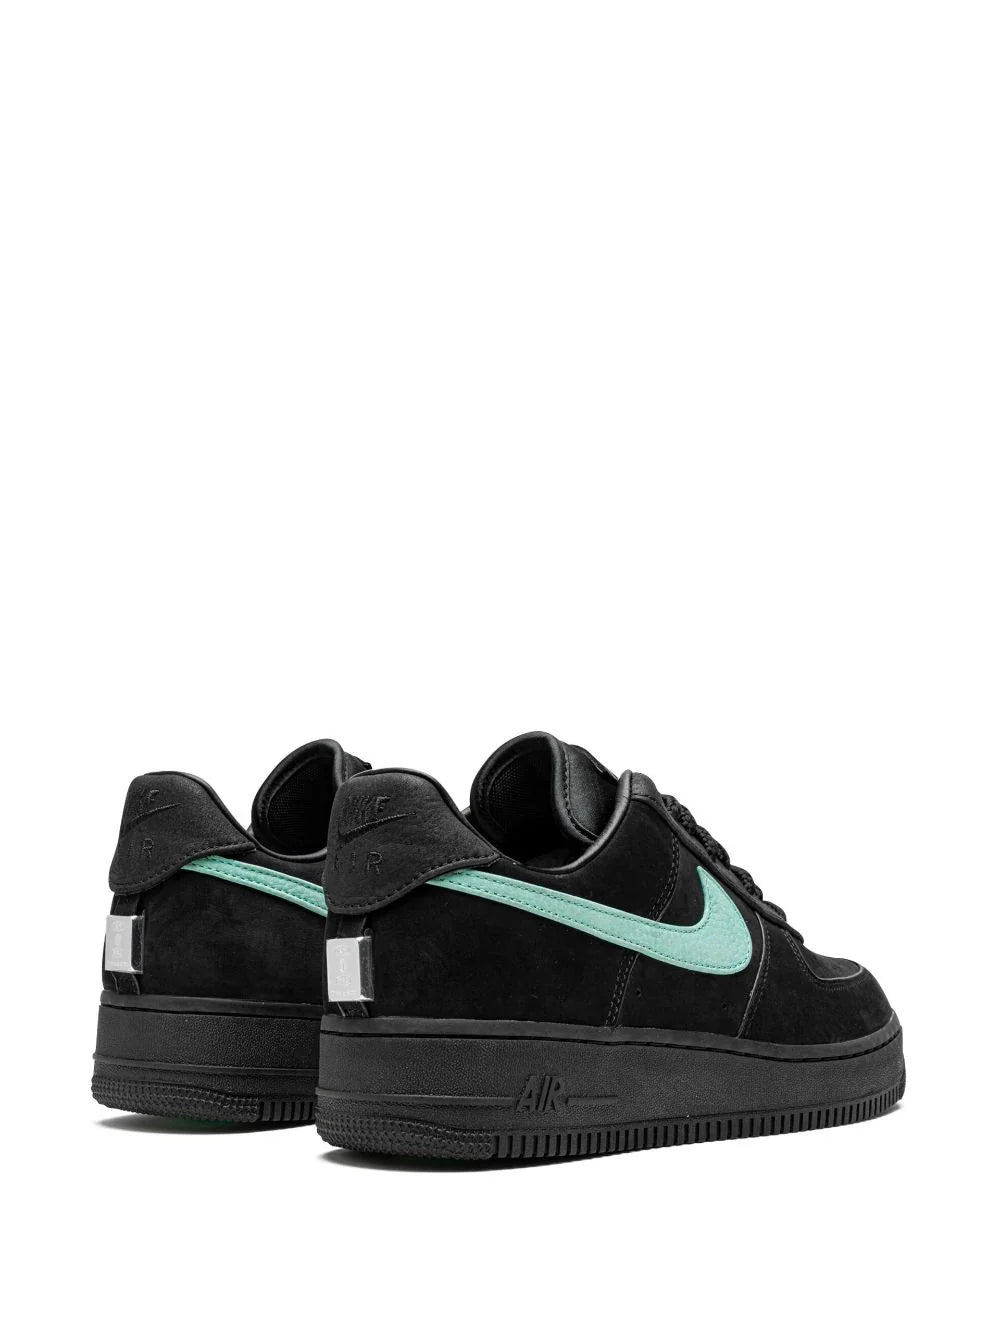 AIRFORCE 1 X TIFFANY & CO. LOW